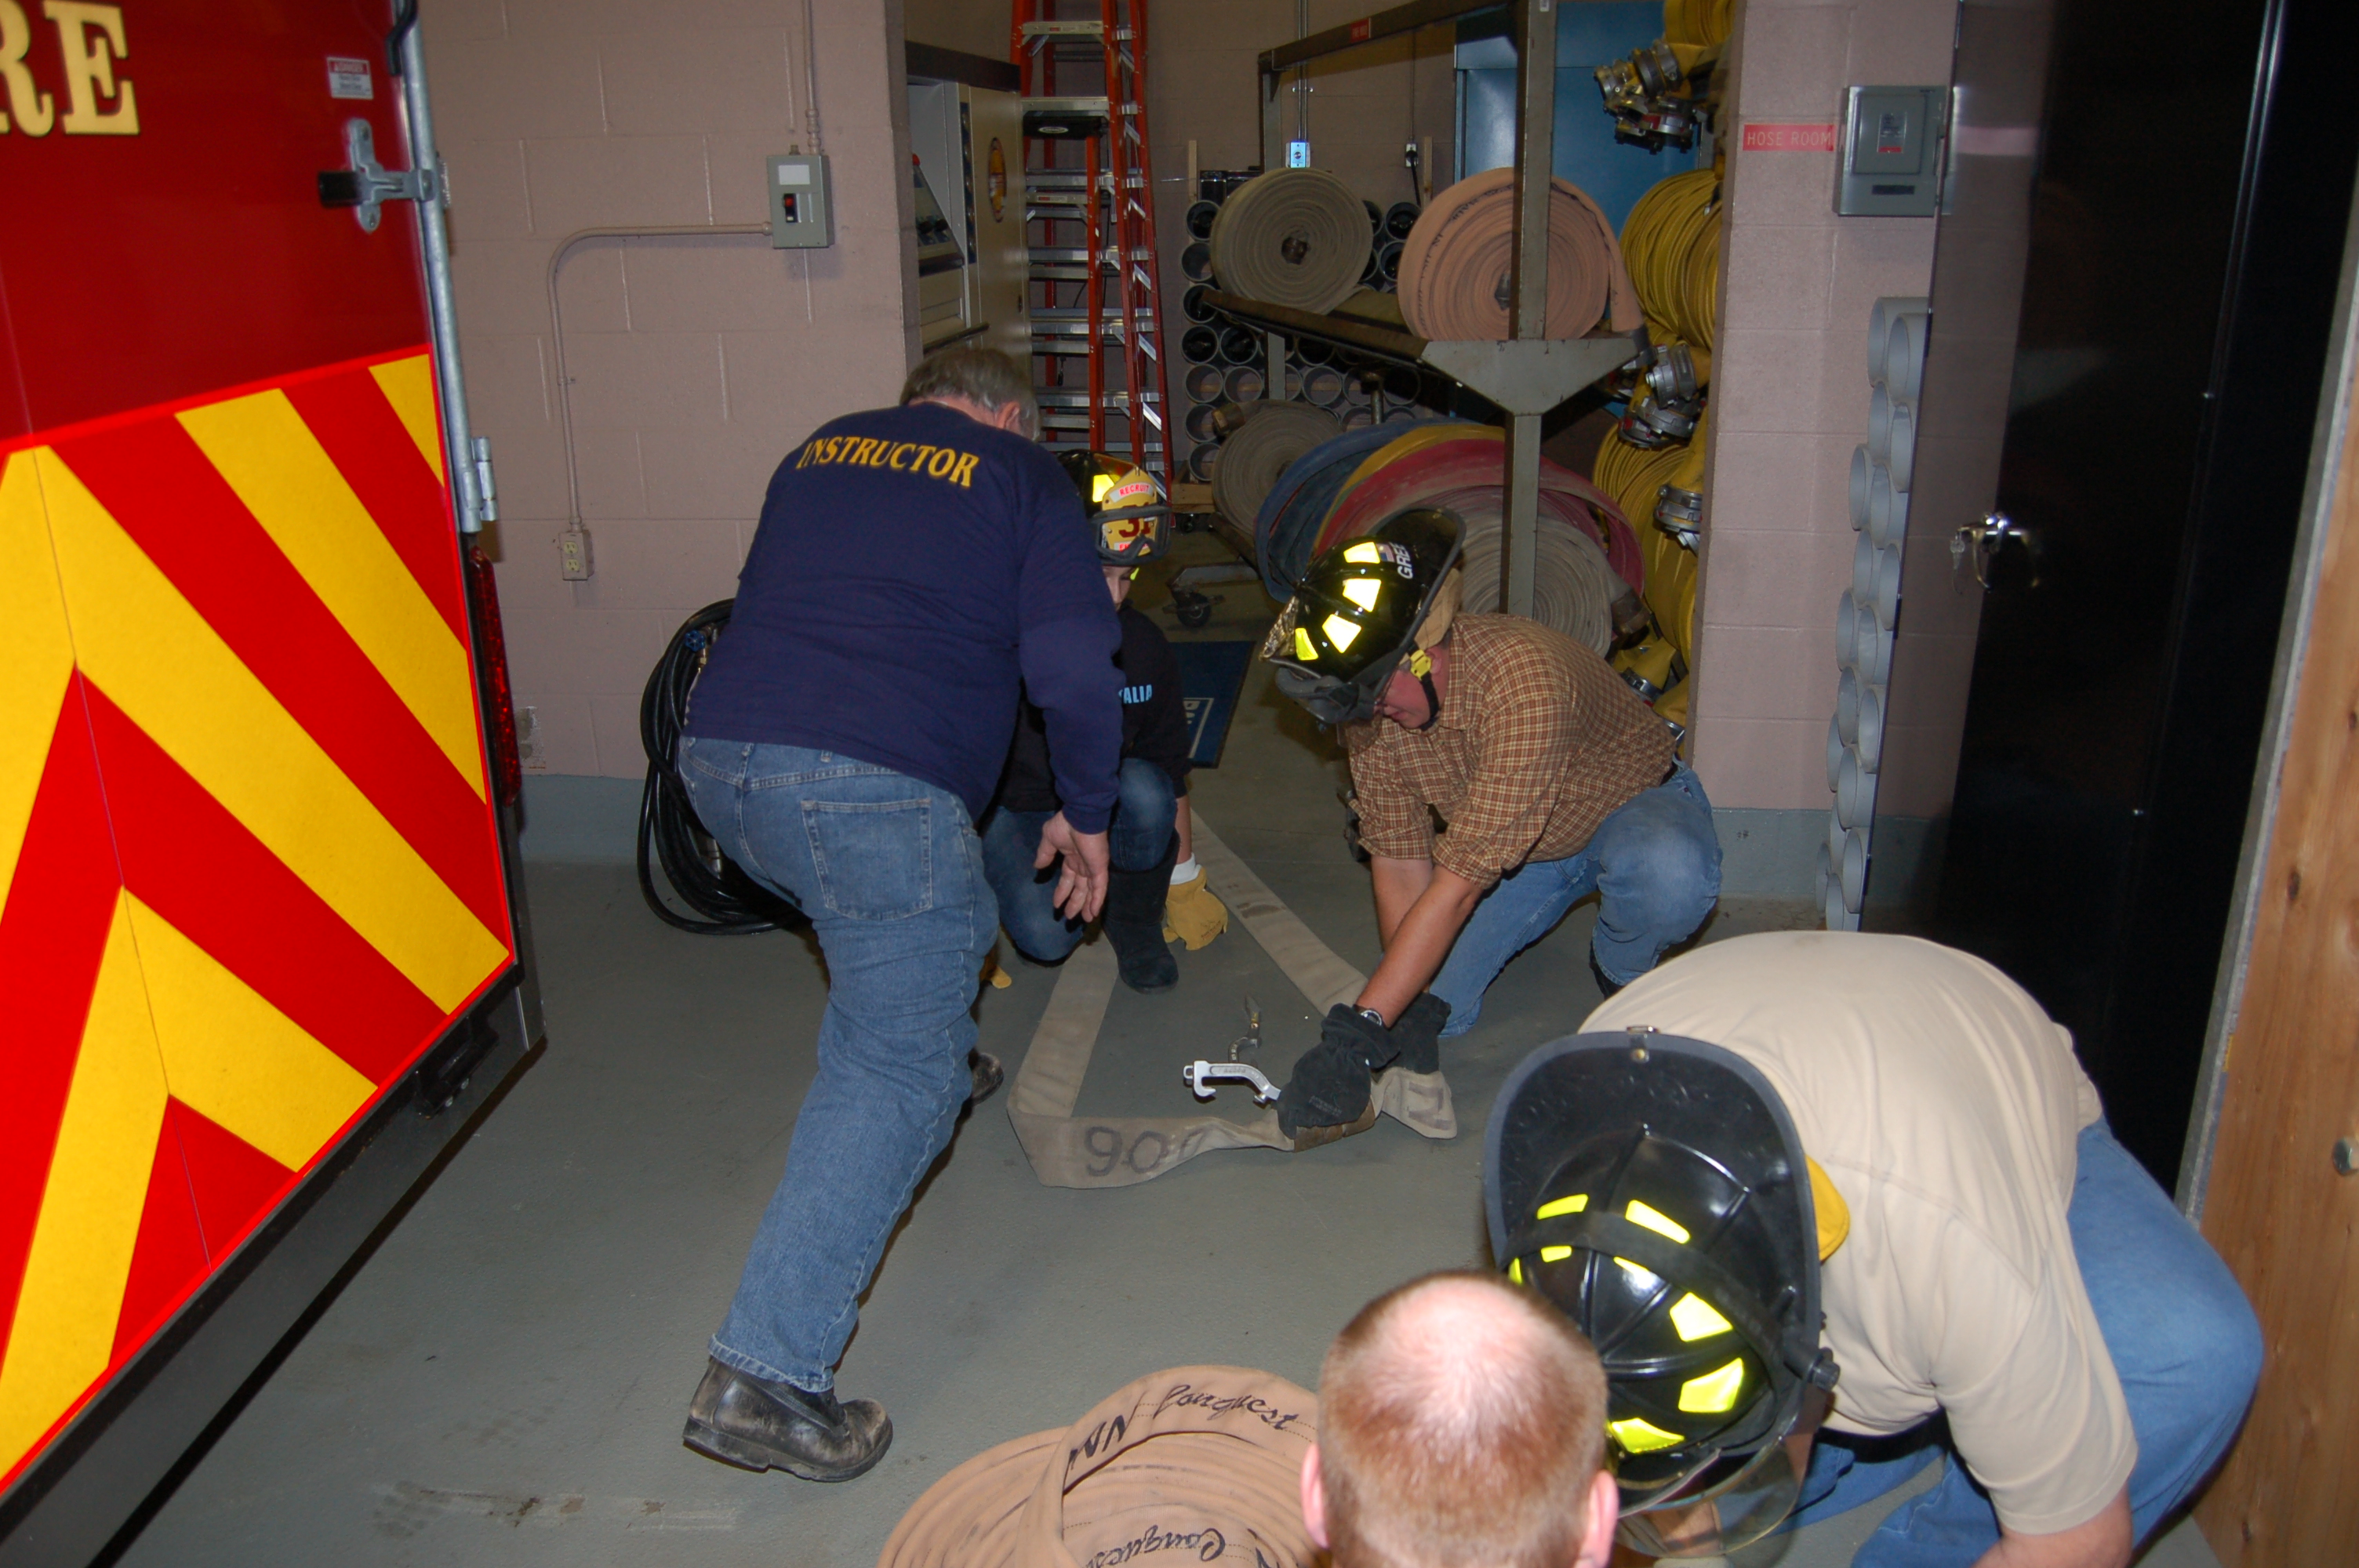 12-19-11  Other - Fire Fighter 1 Class